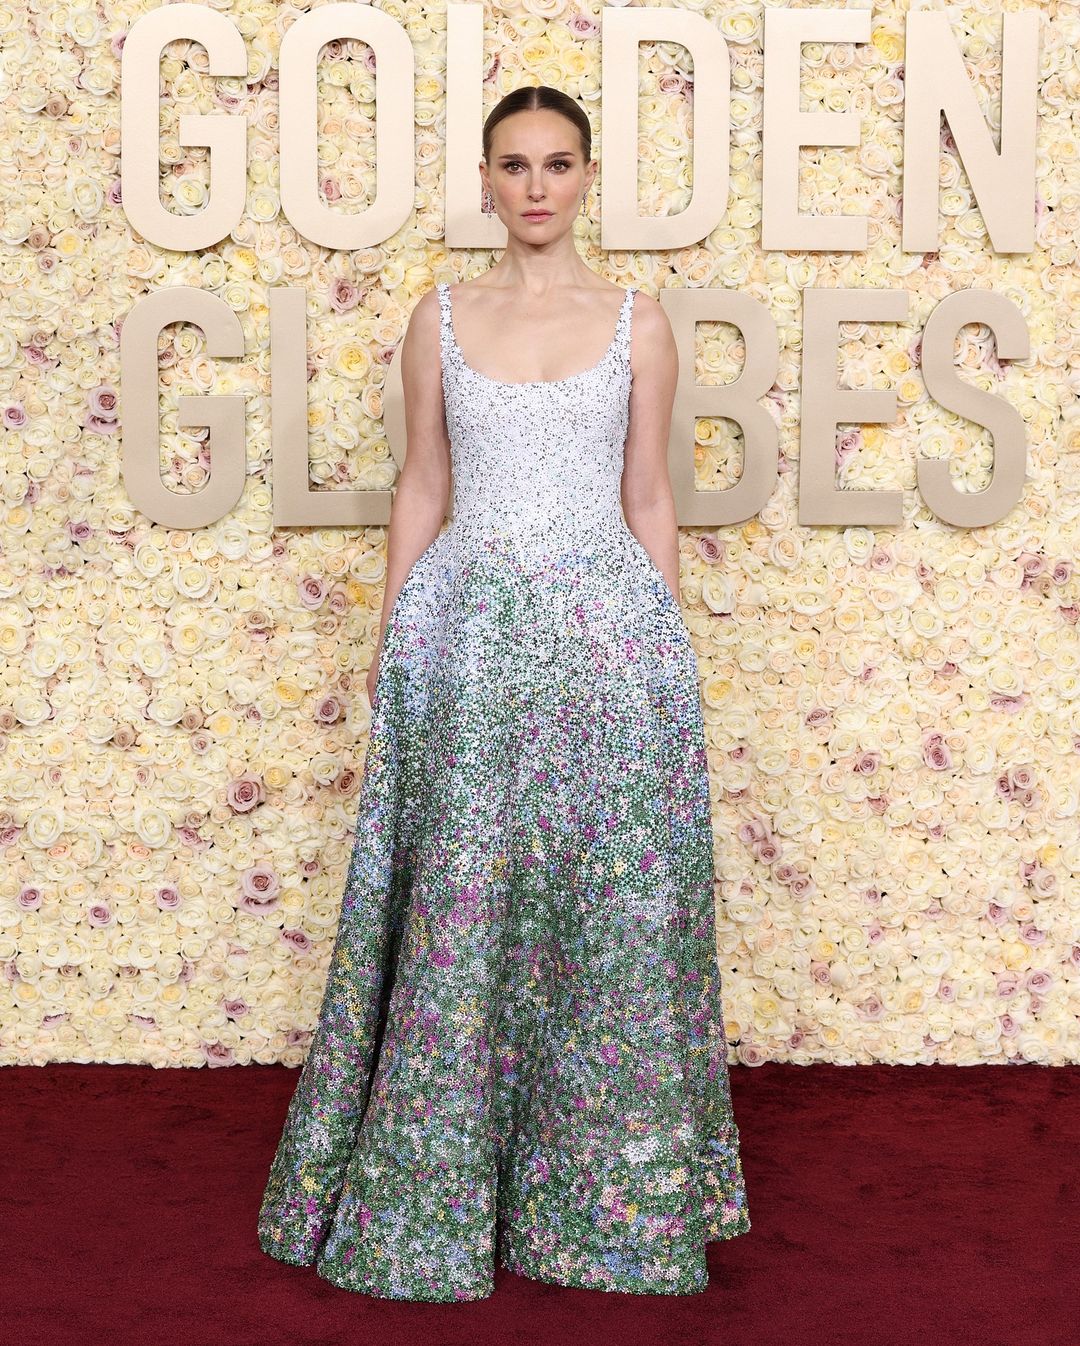 Natalie Portman is a flower goddess with a custom Dior gown with embroidered micro-florals